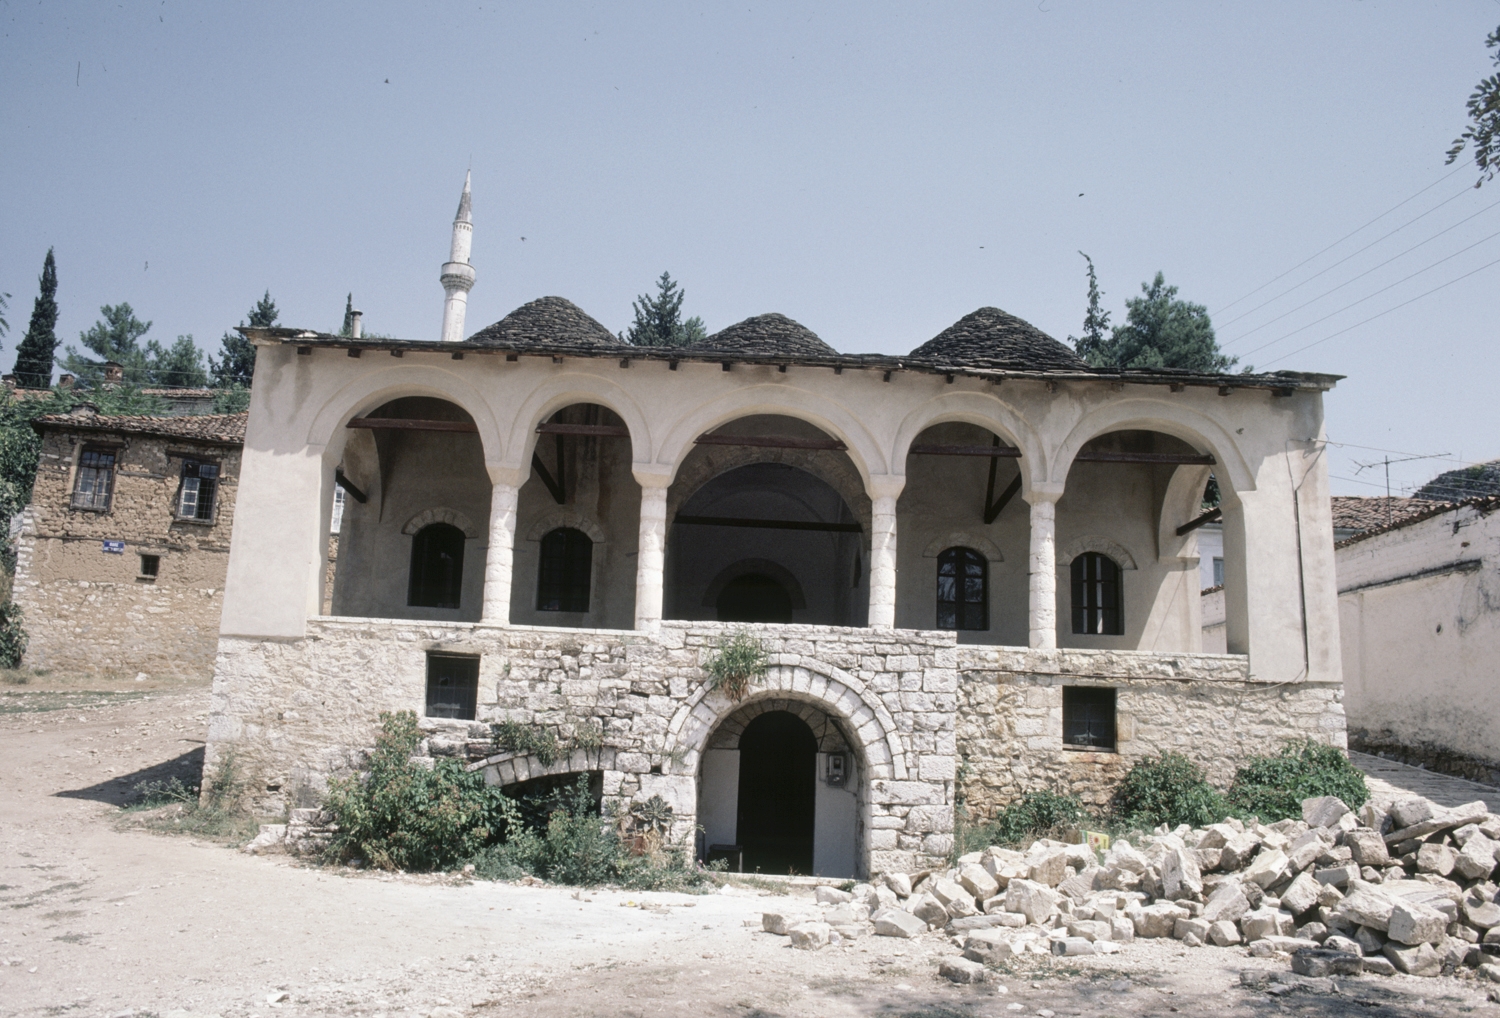 Front facade, with porch; minaret from the mosque of Aslan Pasha visible above roof